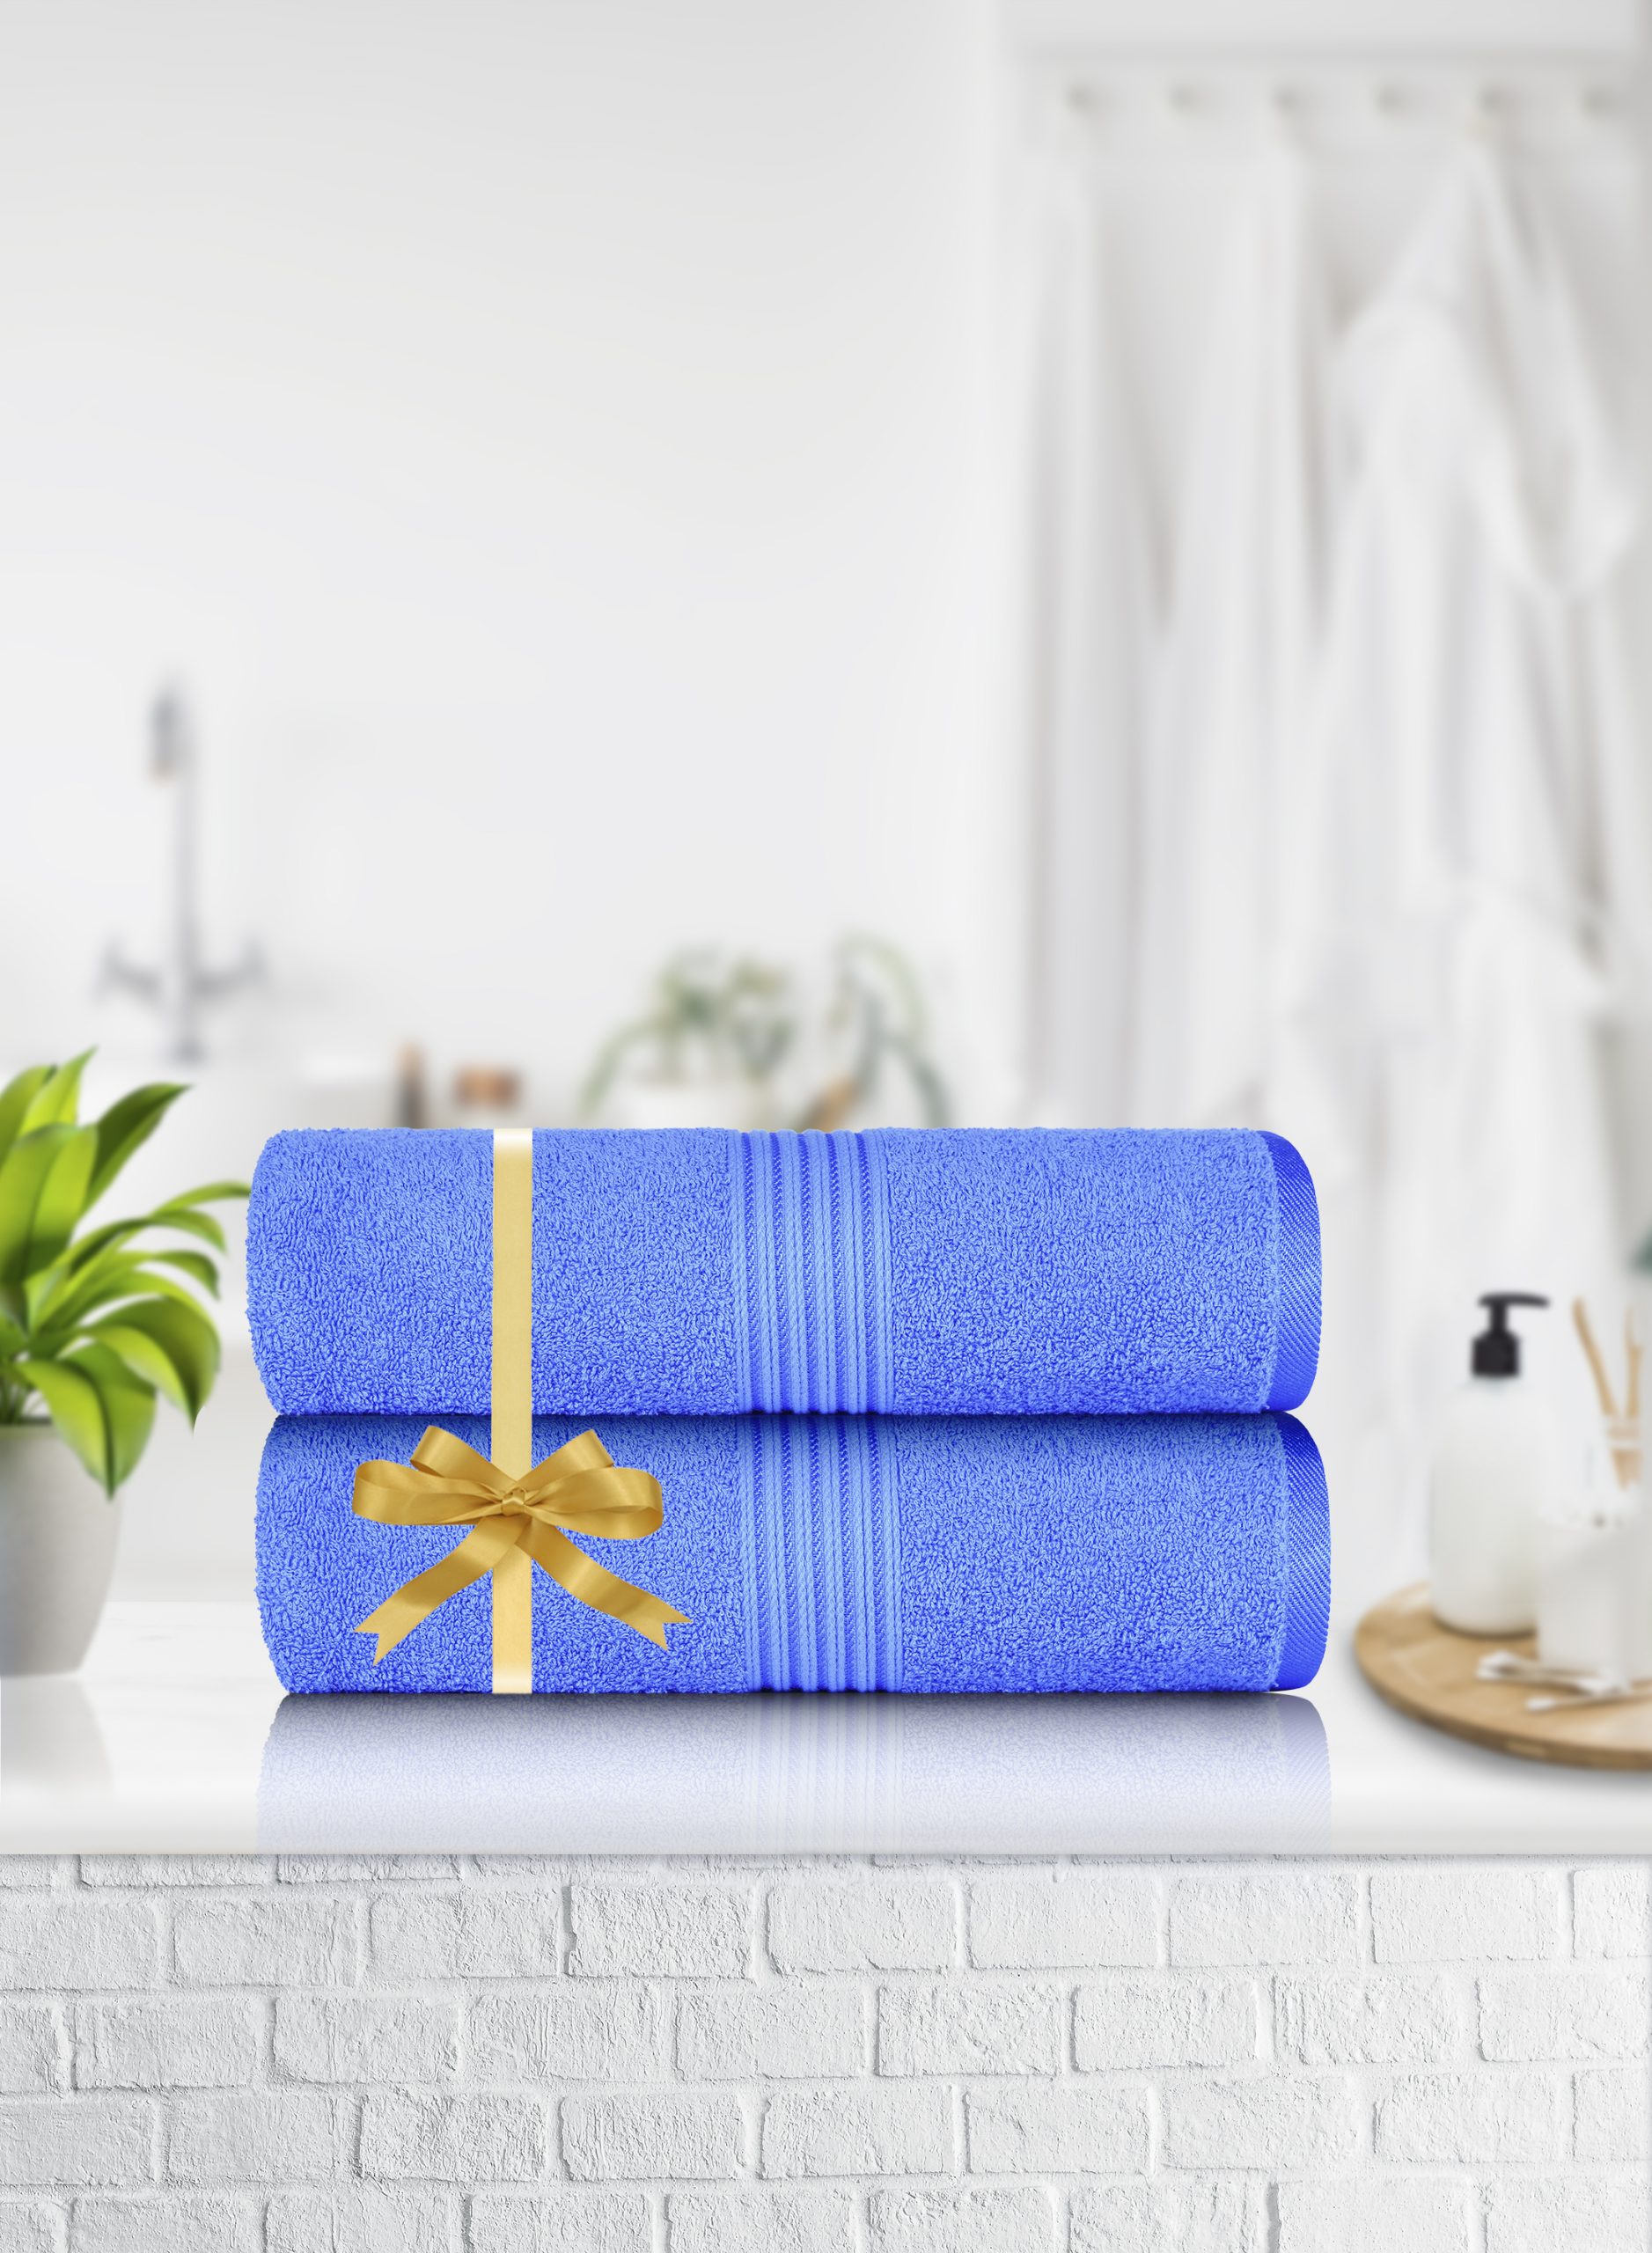 Desire Series- Jumbo Beach Towel Set (2 Pack, 90x180 cm) - 600 GSM Xtra Large Bath Towel - 100% Combed Cotton Bathsheets Highly Absorbent and Quick Dry Bath Towel - Super Soft Hotel Quality Towel